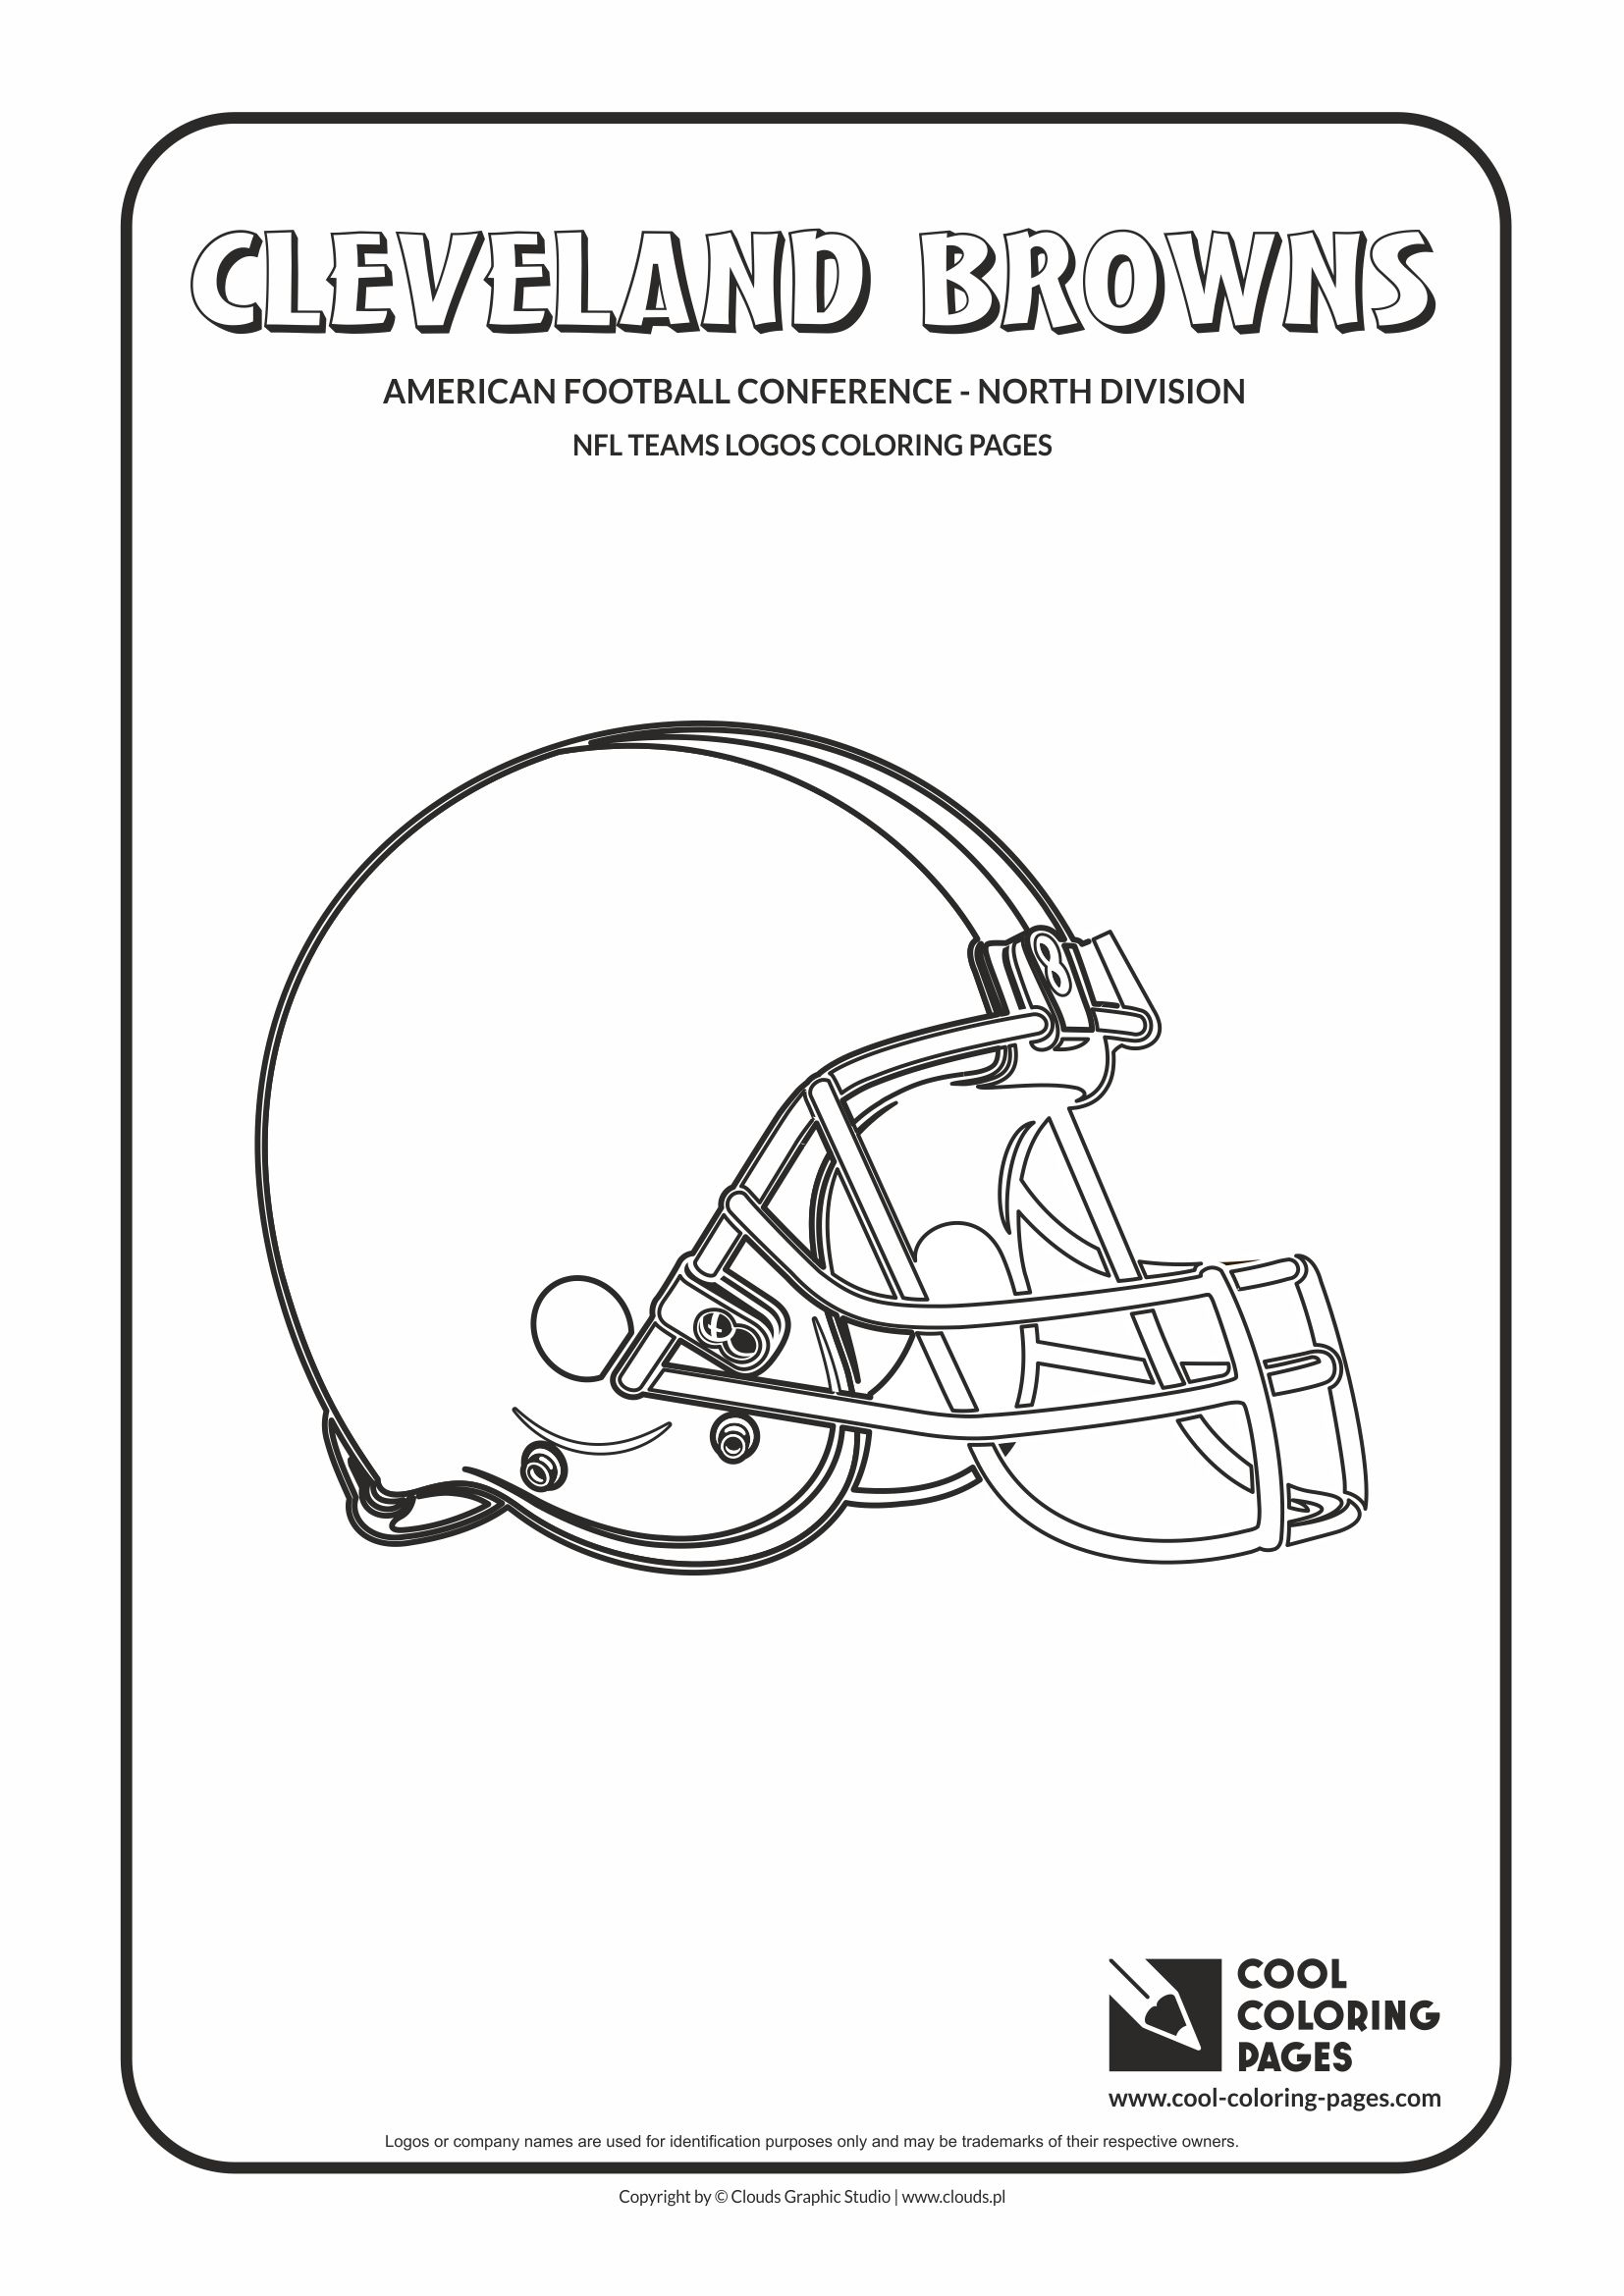 Cool Coloring Pages - NFL American Football Clubs Logos - American Football Conference - North Division / Cleveland Browns logo / Coloring page with Cleveland Browns logo